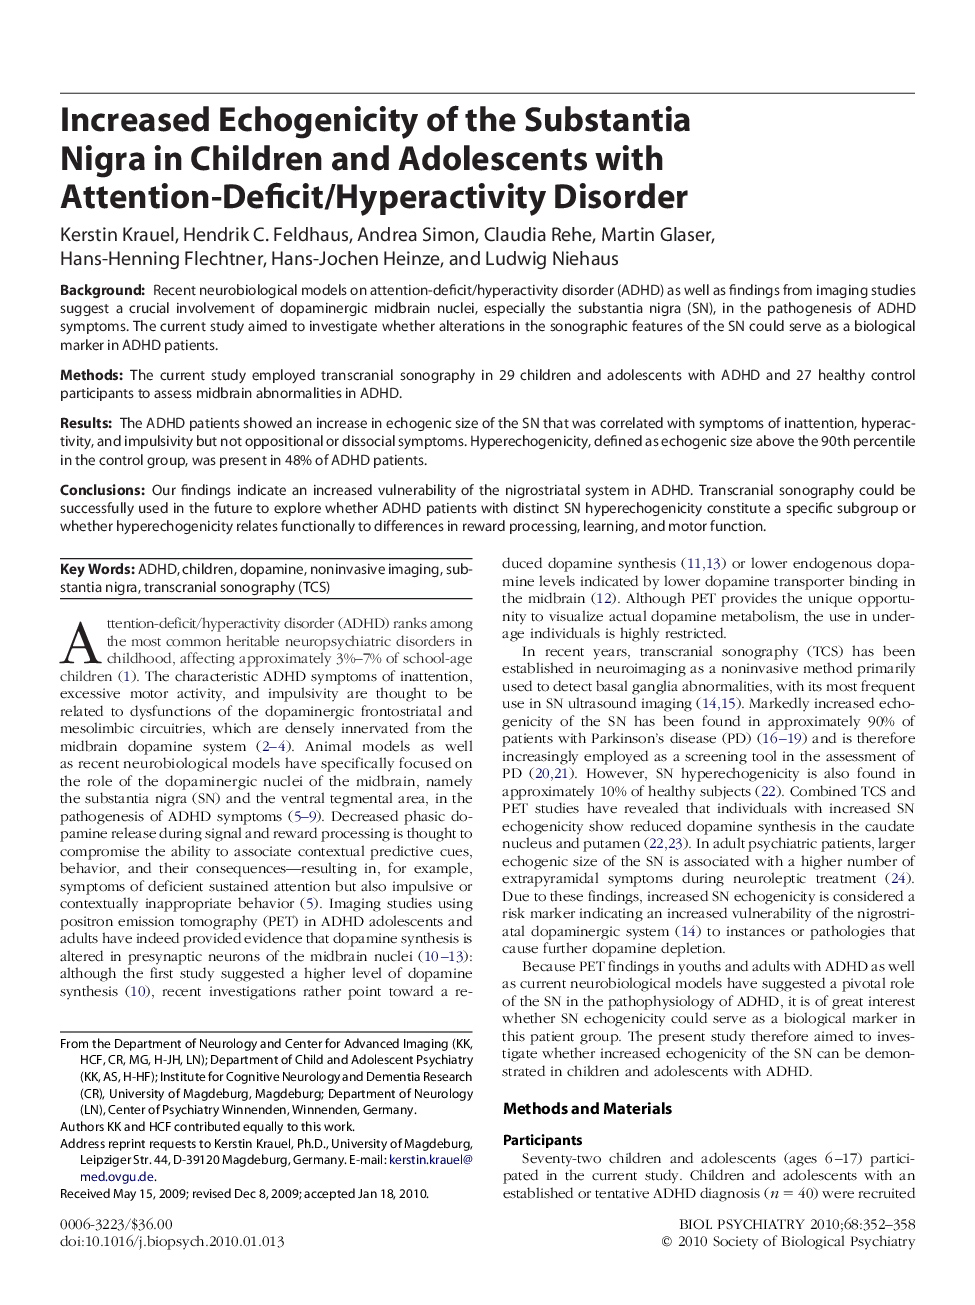 Increased Echogenicity of the Substantia Nigra in Children and Adolescents with Attention-Deficit/Hyperactivity Disorder